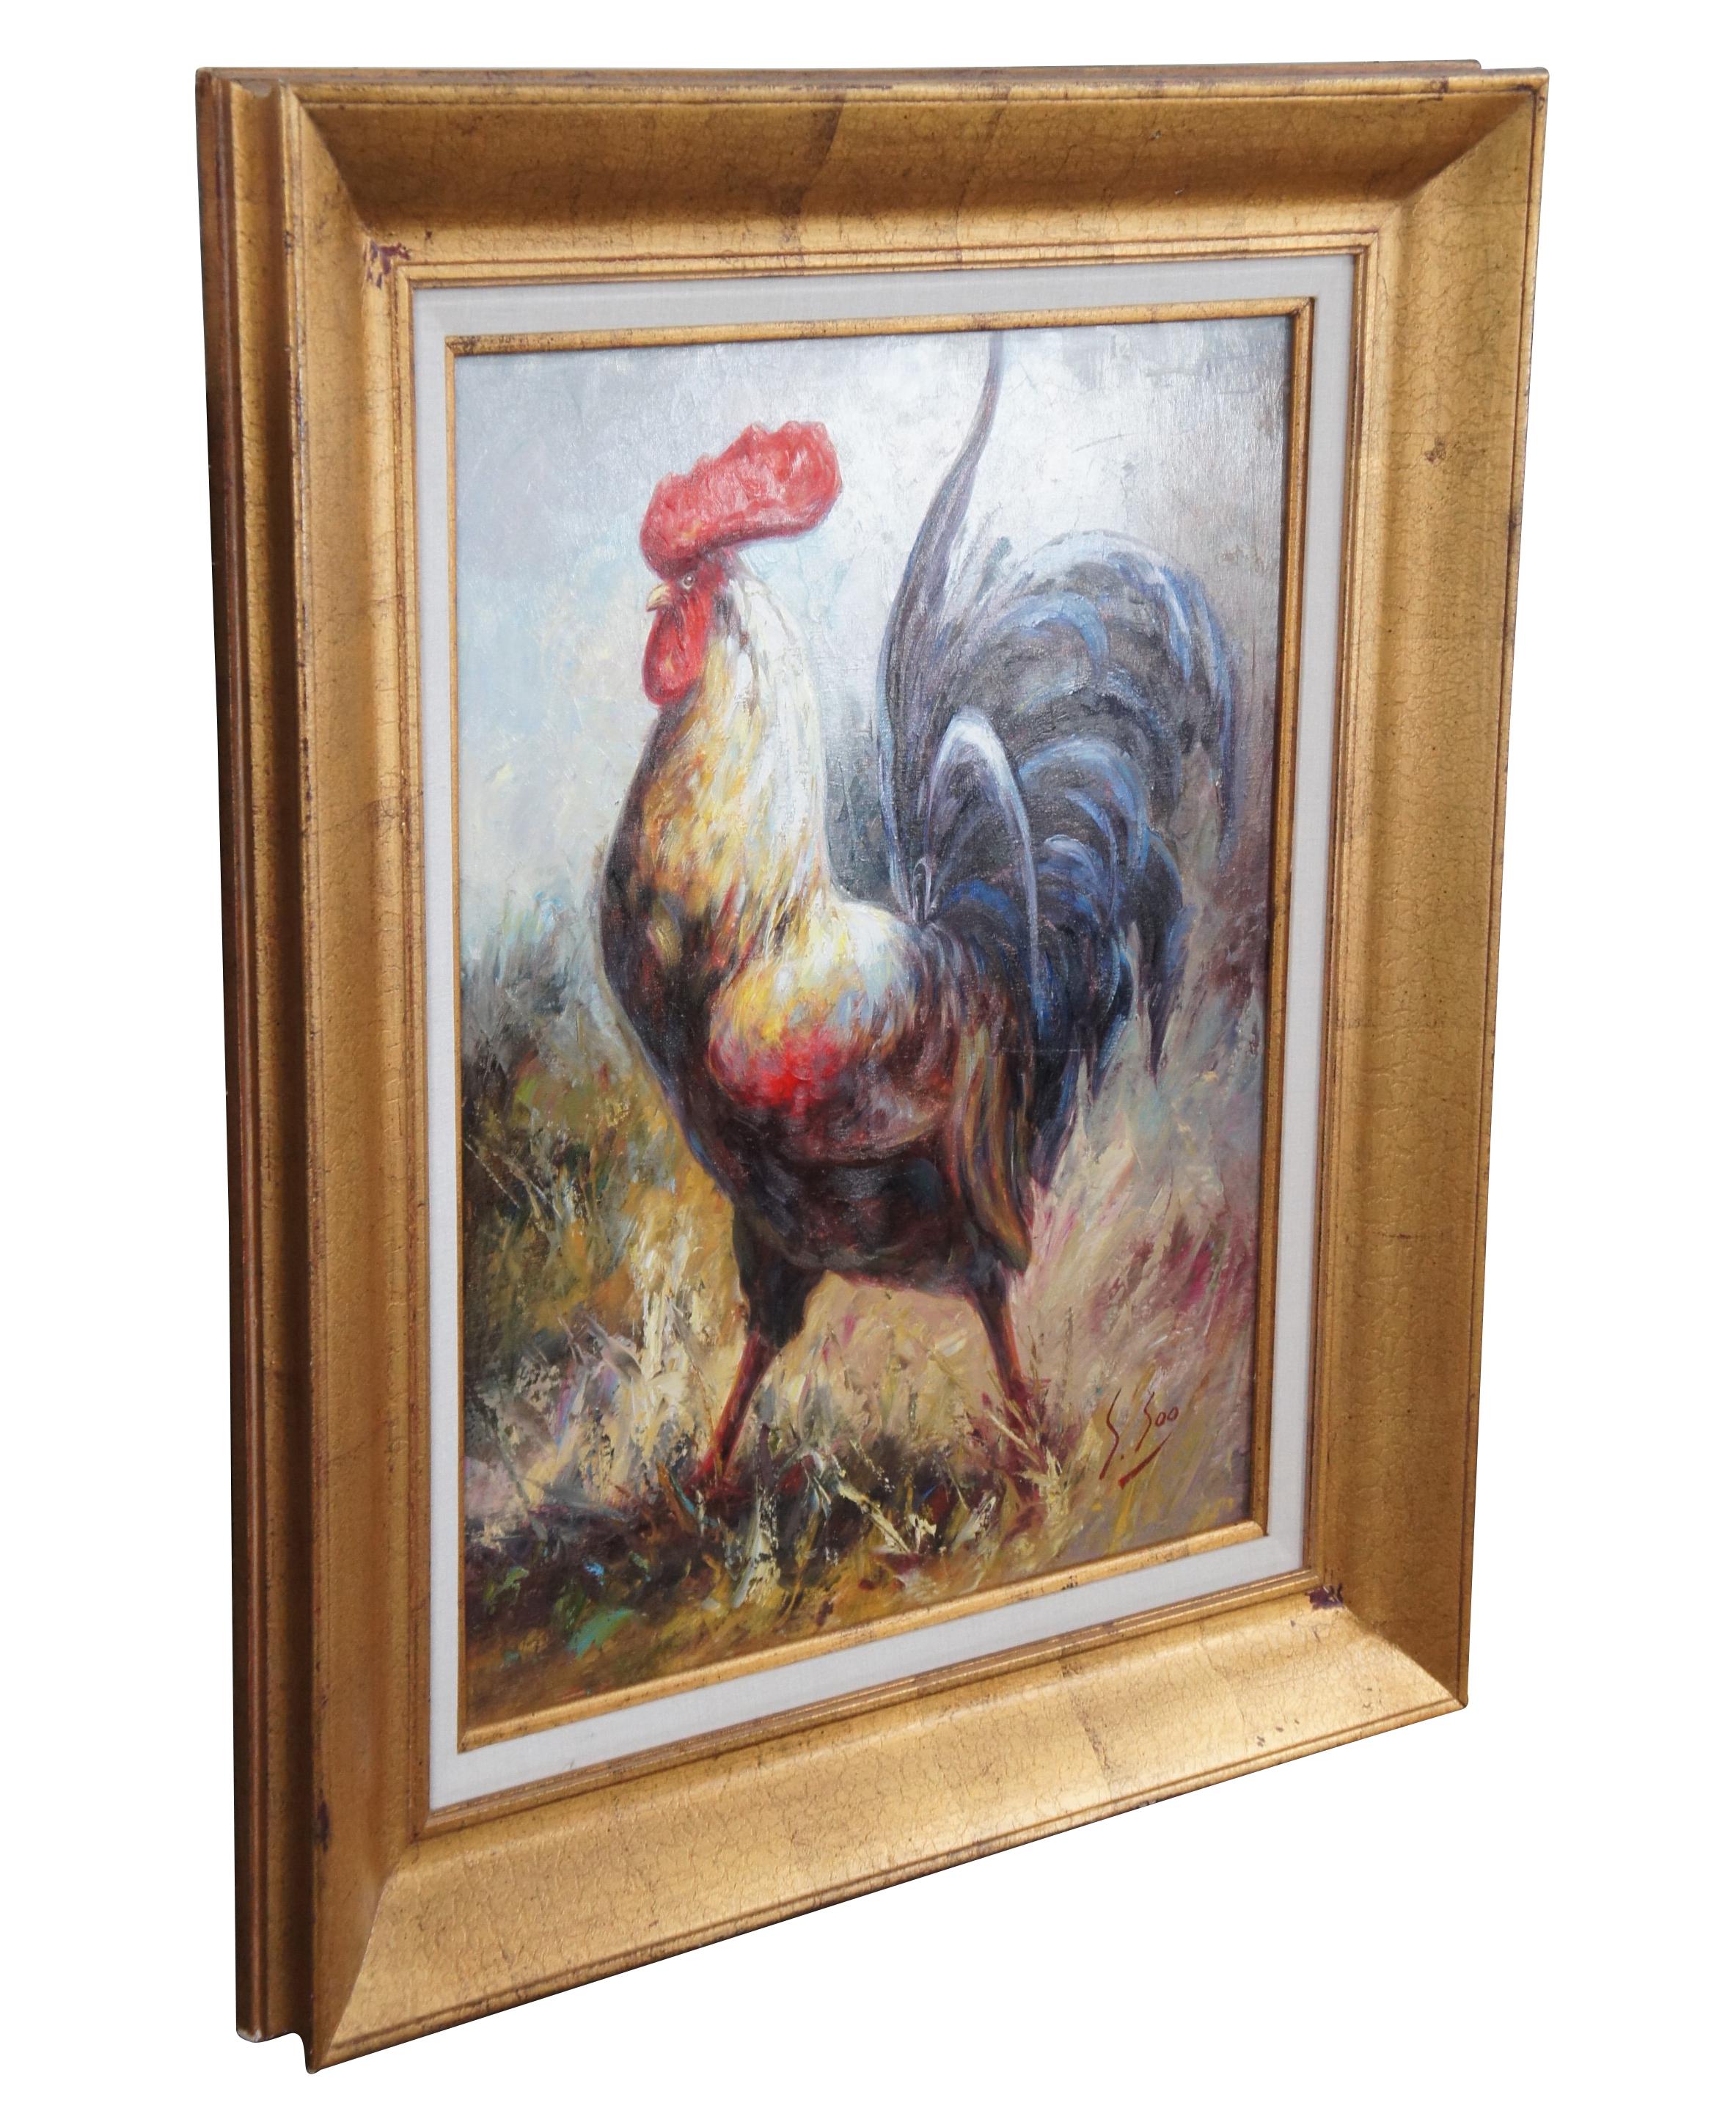 Large vintage Impressionist country farmhouse oil painting featuring a portrait of a Rooster / bird in a colorful spectrum of light. Signed lower right by S. Soo. Framed in Camille gold crackle frame. 

Dimensions:
35